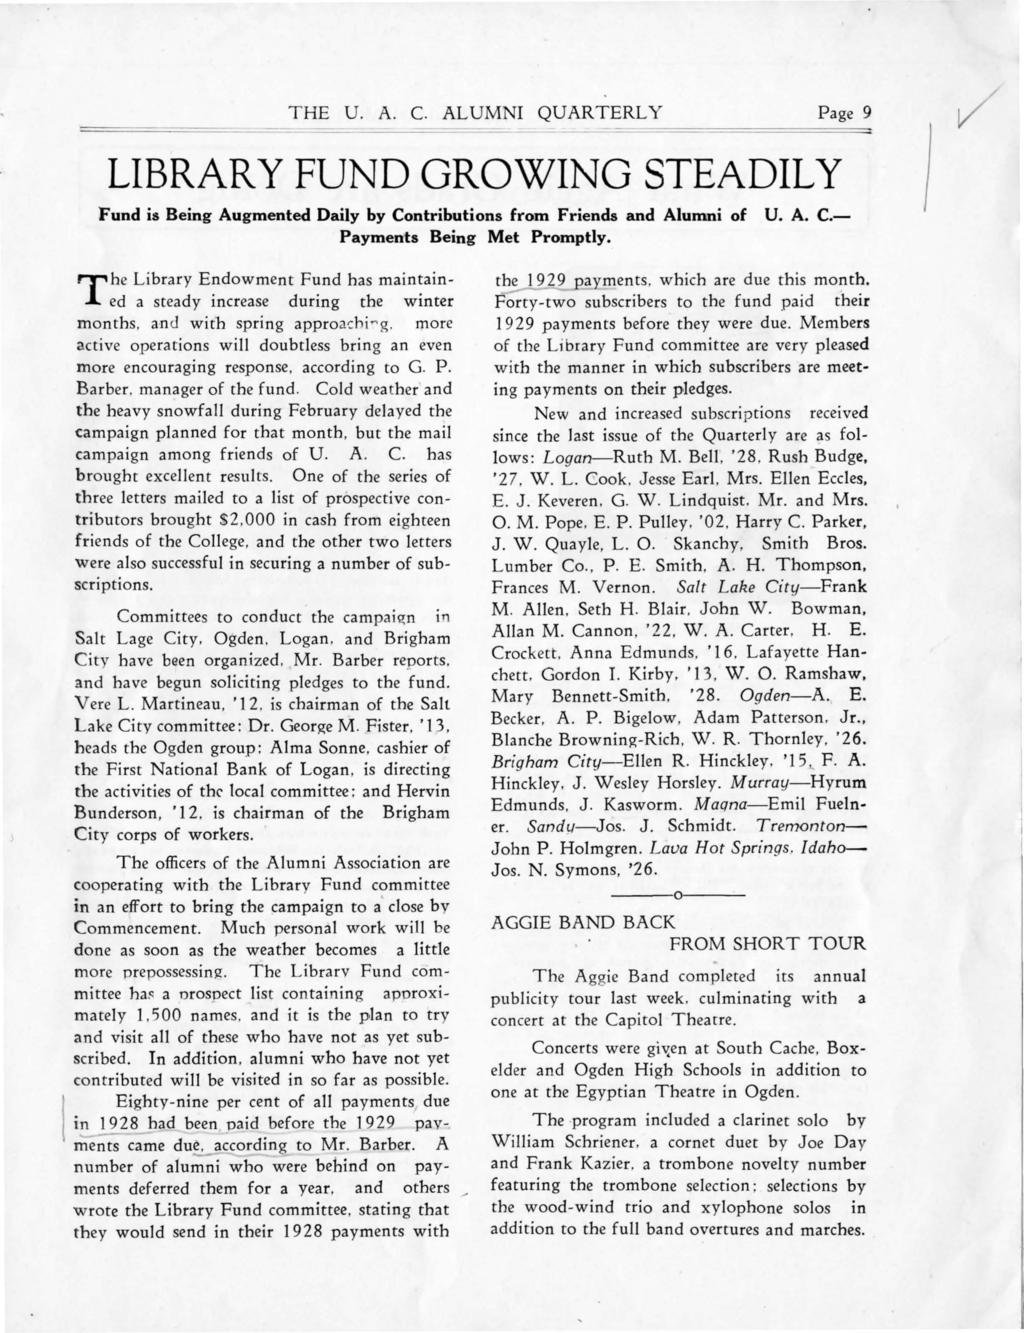 THE U. A. C. ALUM QUARTERLY Page 9 LBRARY FUND GROWNG STEADLY Fund s Beng Augmented Daly by Contrbutons from Frends and Alumn of U. A. C. Payments Beng Met Promptly.